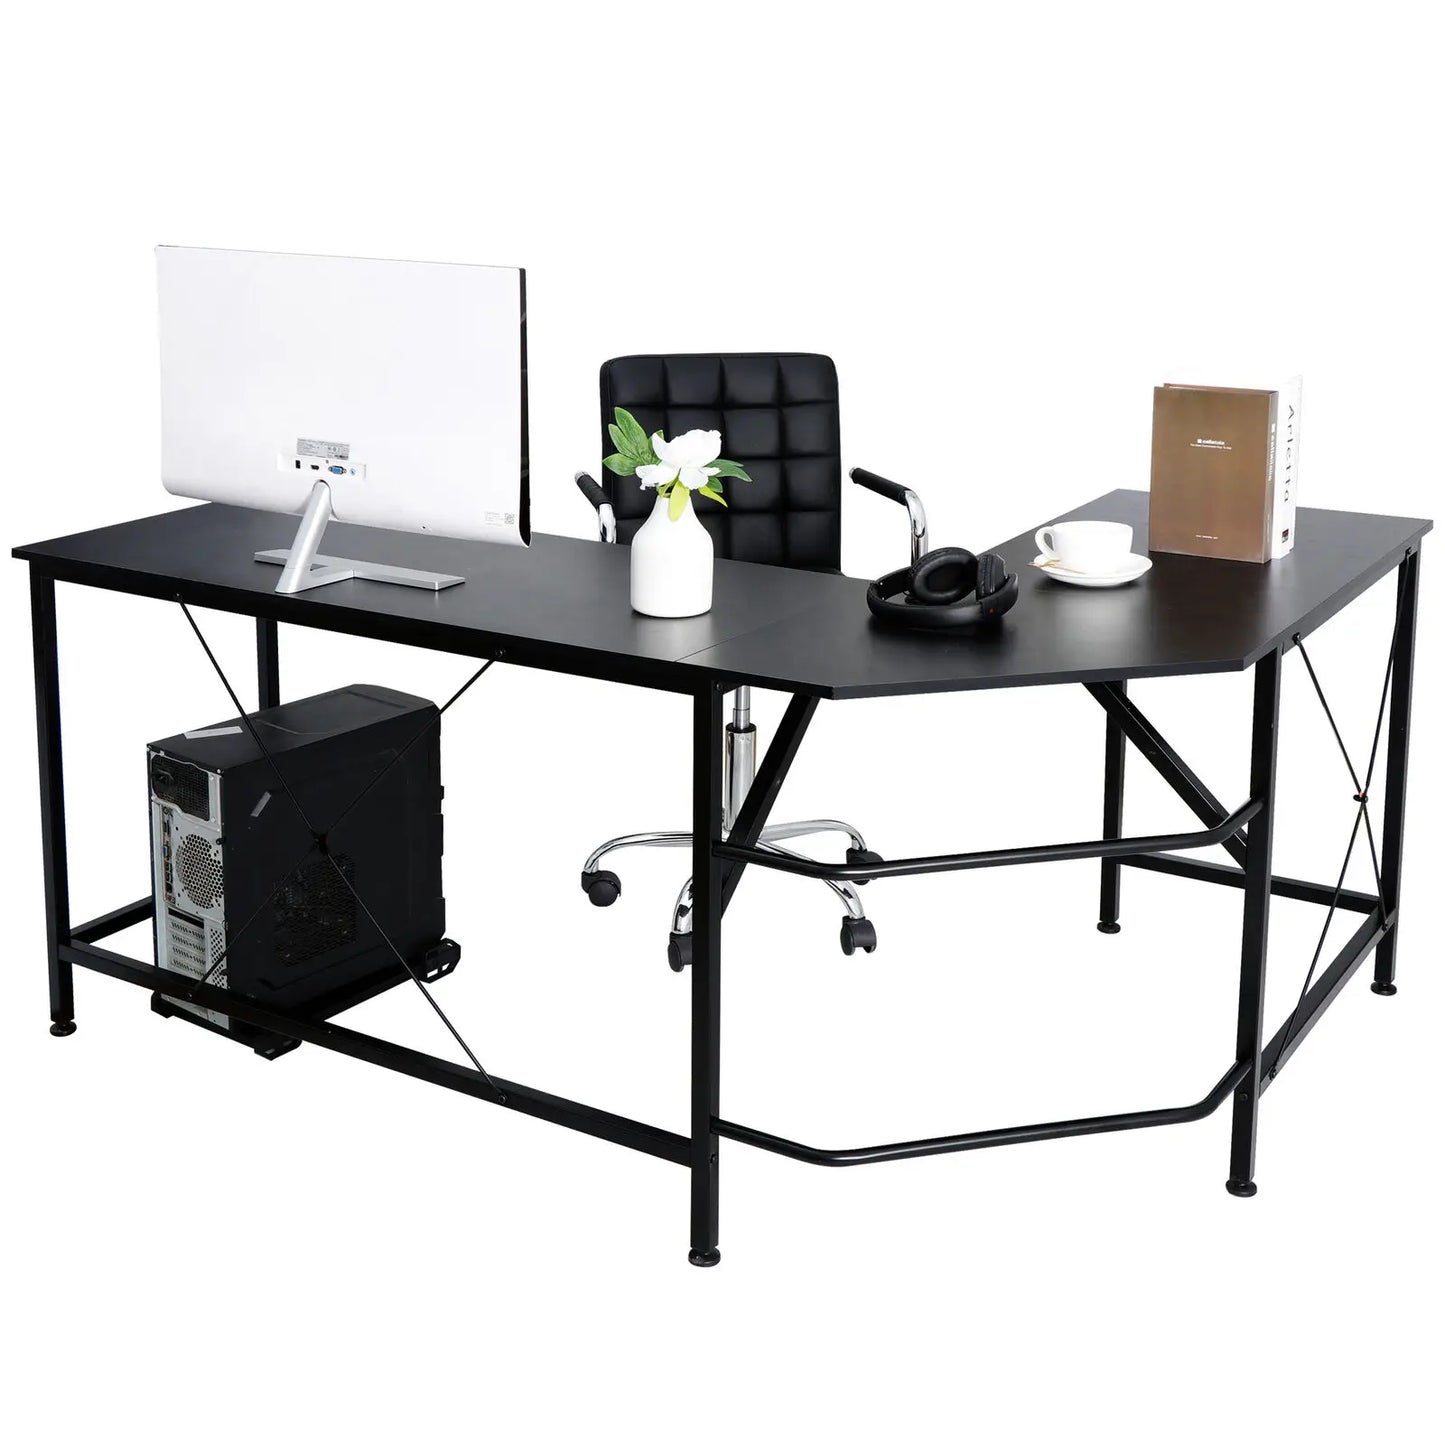 Stainless Steel Portable Computer Desk Bedroom, Home Office/Study Workbenches Adjustable Height